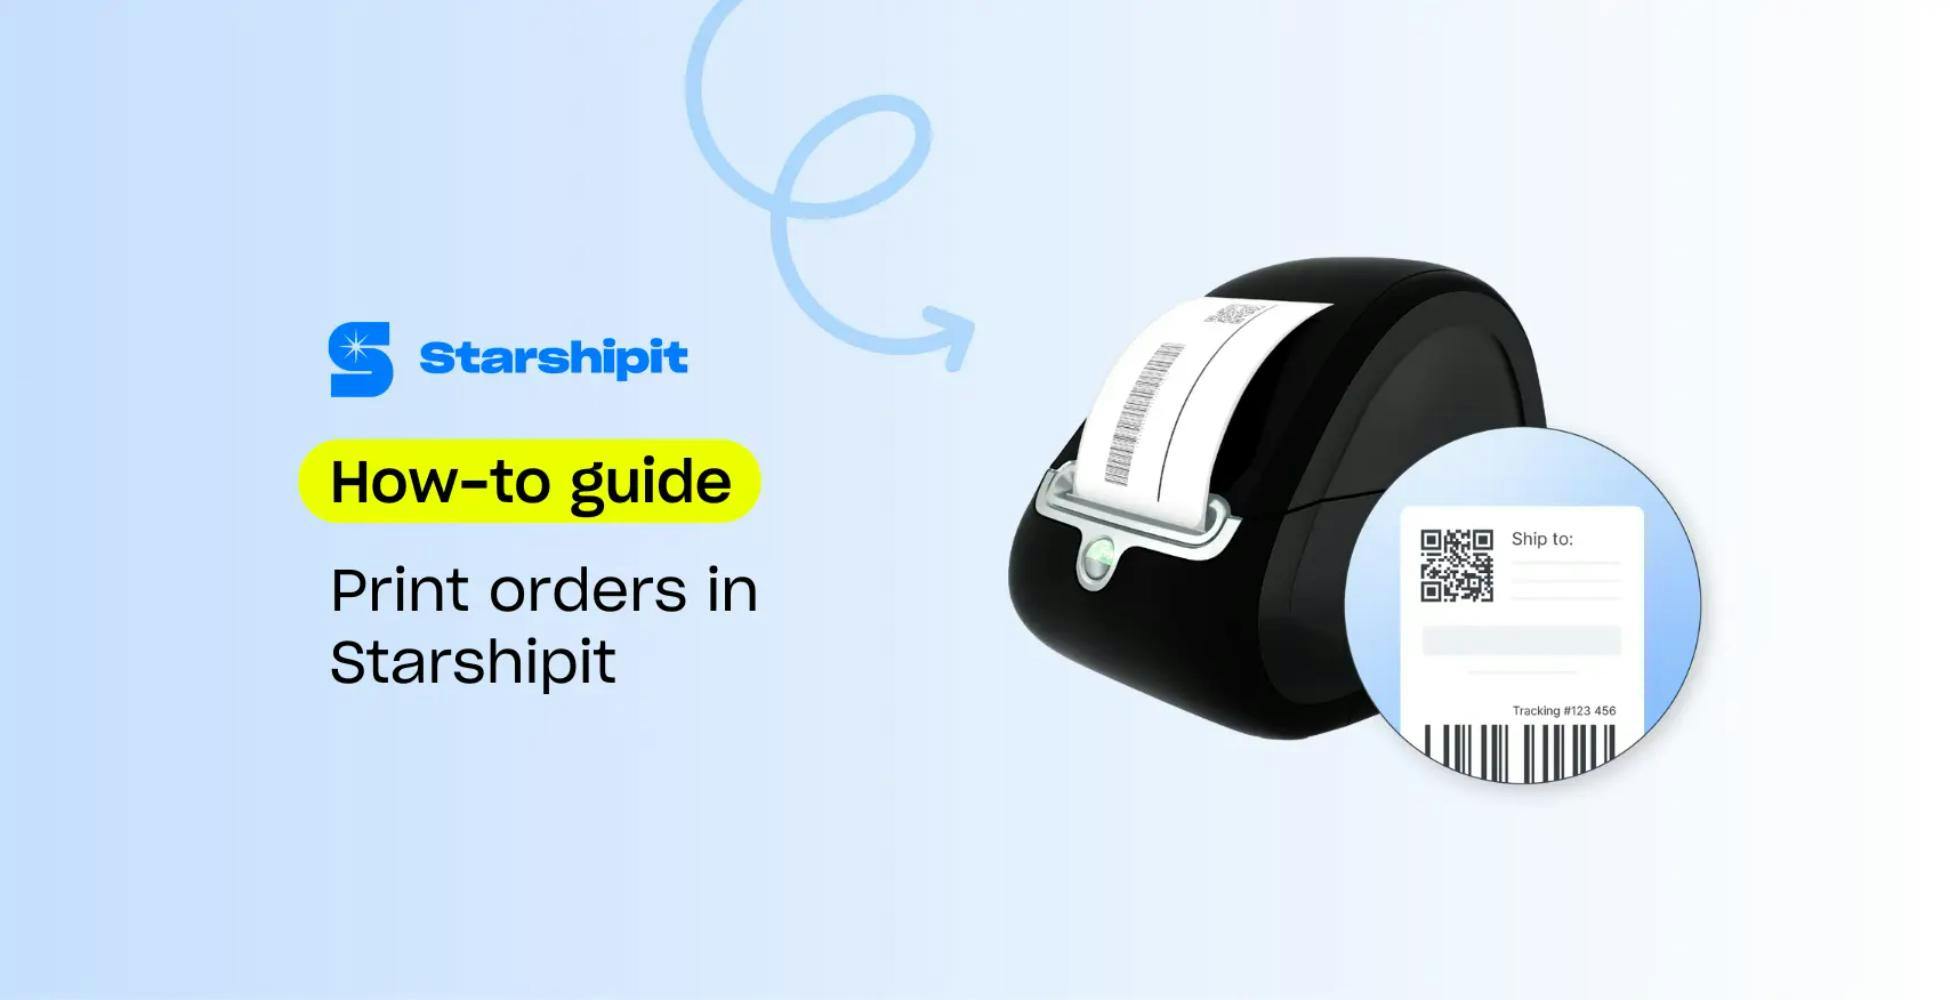 How-to guide: print orders in Starshipit